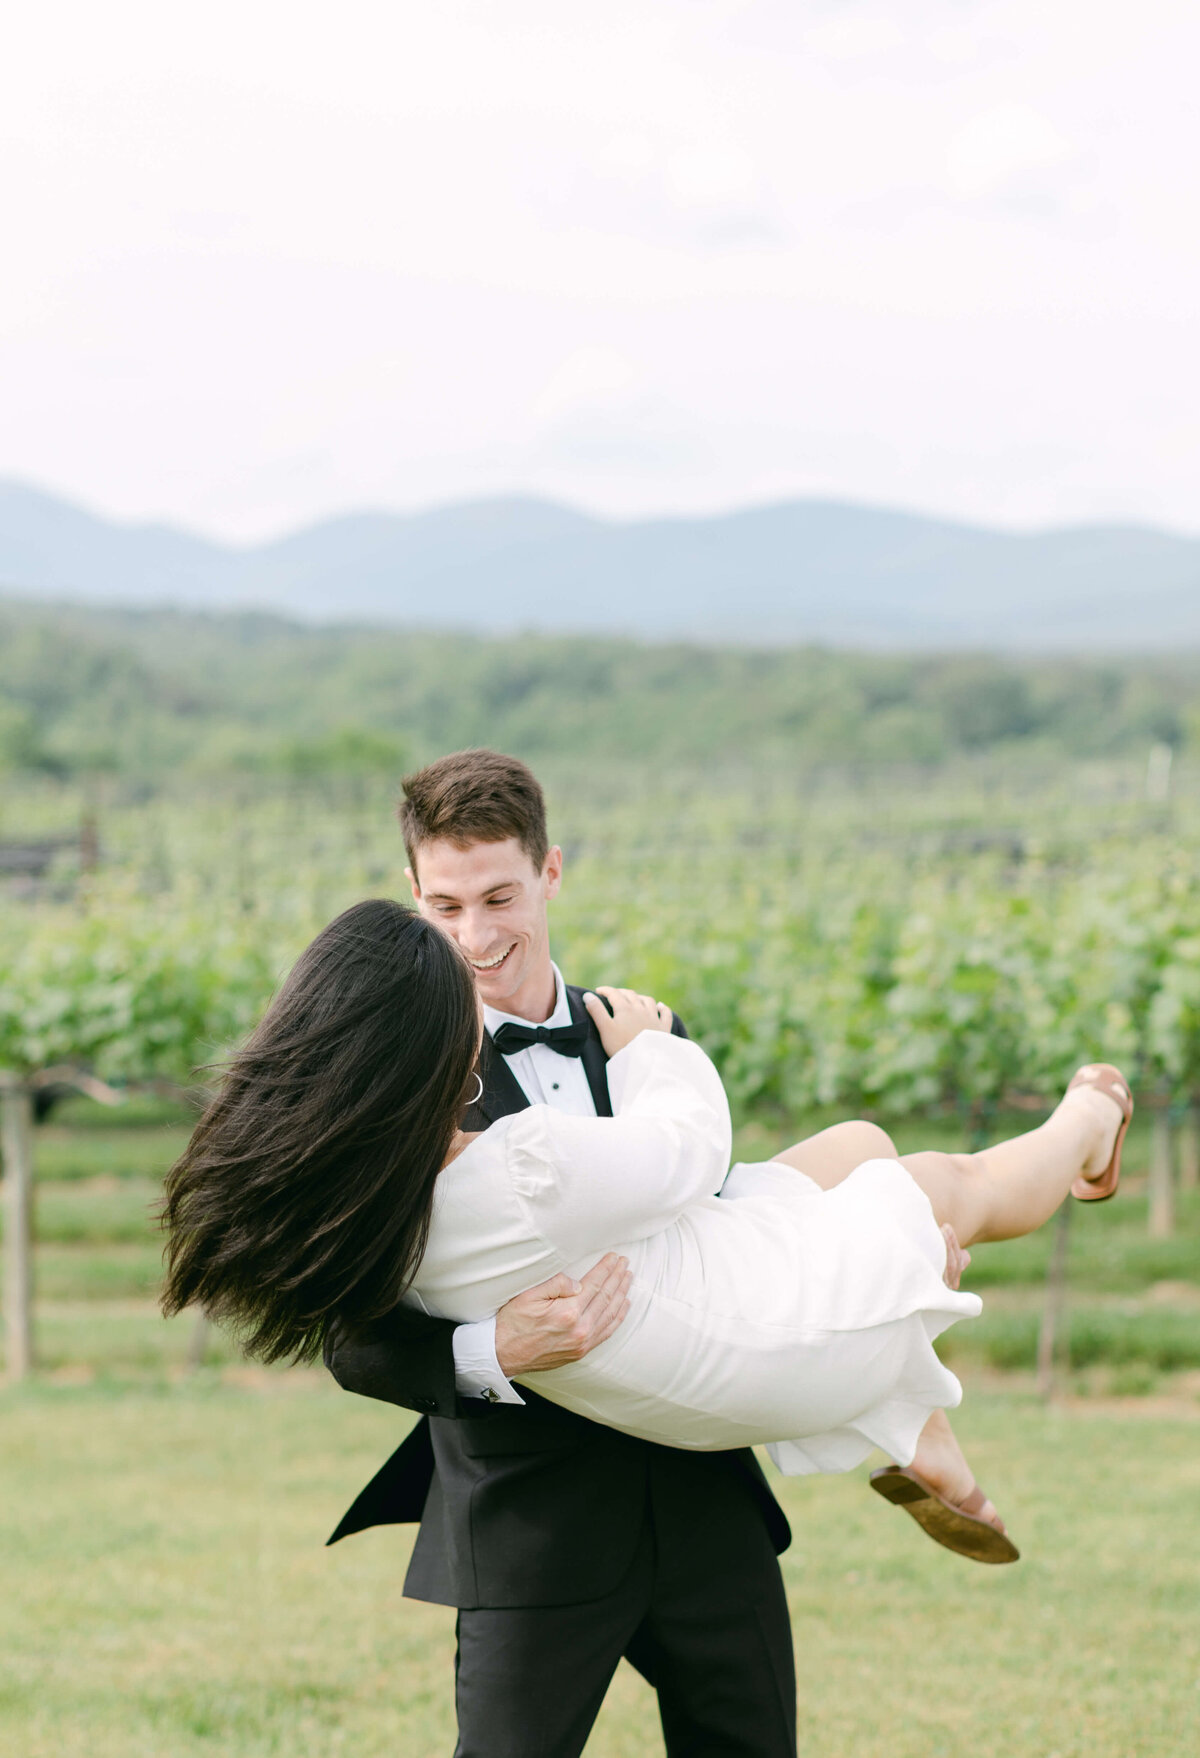 A groom lifts his bride and cradles her in his arms.